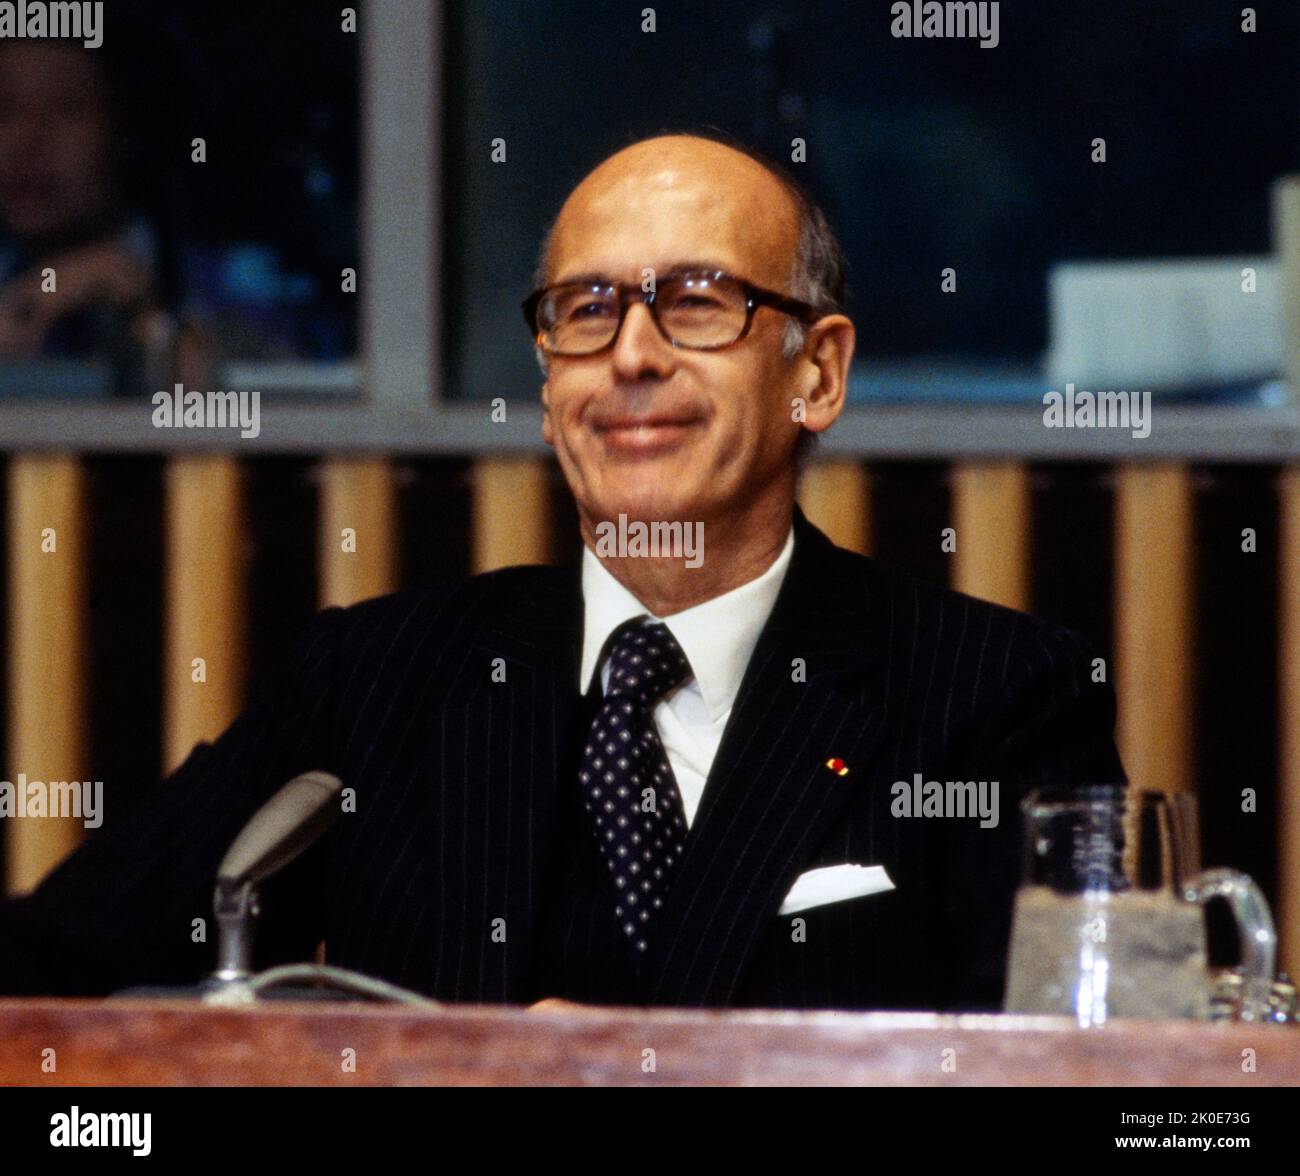 Valery Giscard d'Estaing (1926 - 2020), French politician who served as President of France from 1974 to 1981, seen addressing the United Nations in 1978. Stock Photo